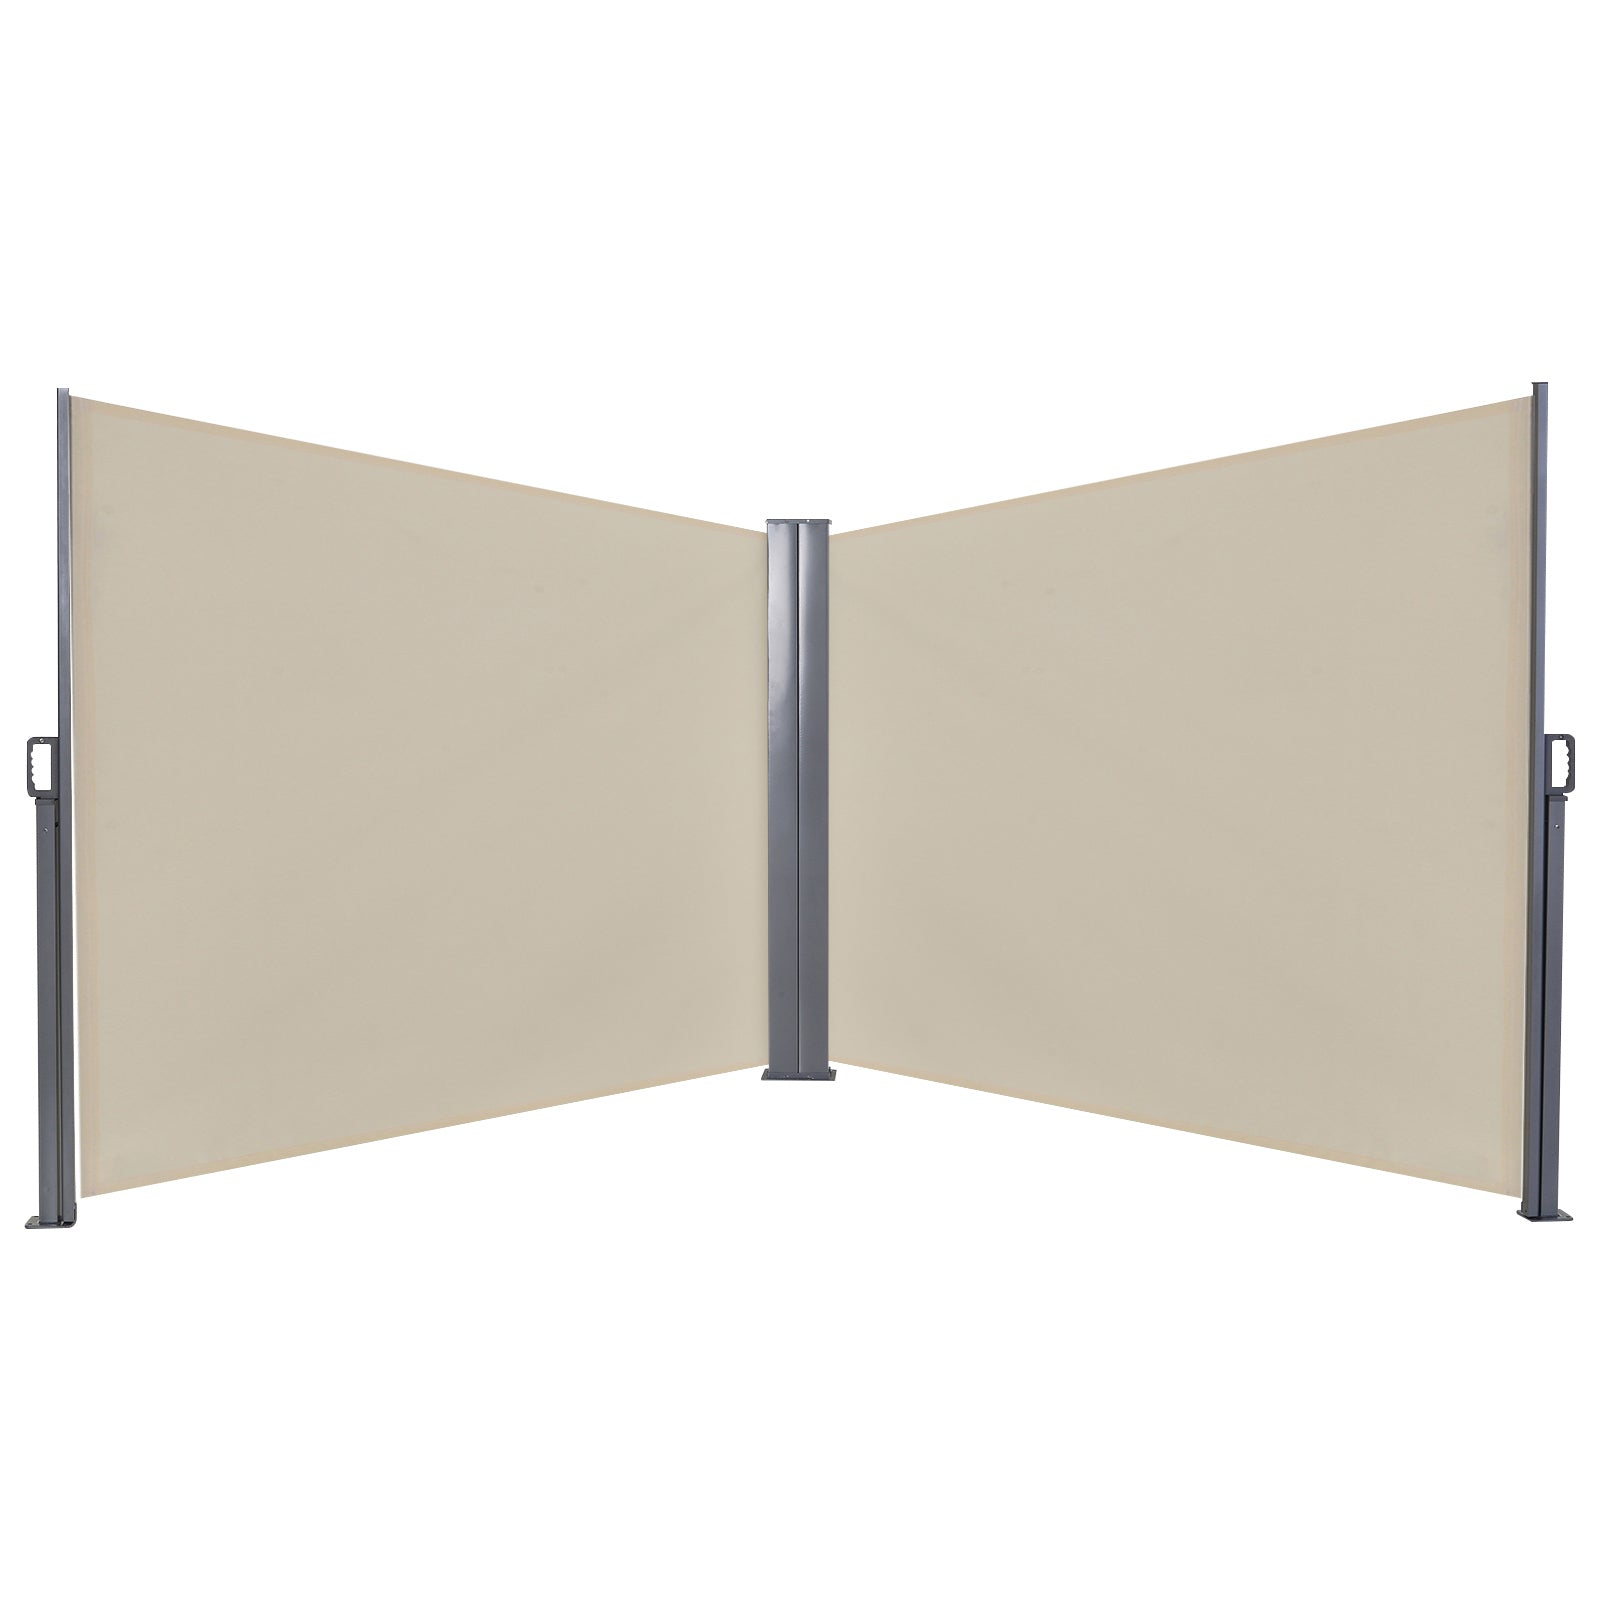 Outsunny Retractable Double Side Awning Screen Fence Privacy Beige - 6x1.6m  | TJ Hughes